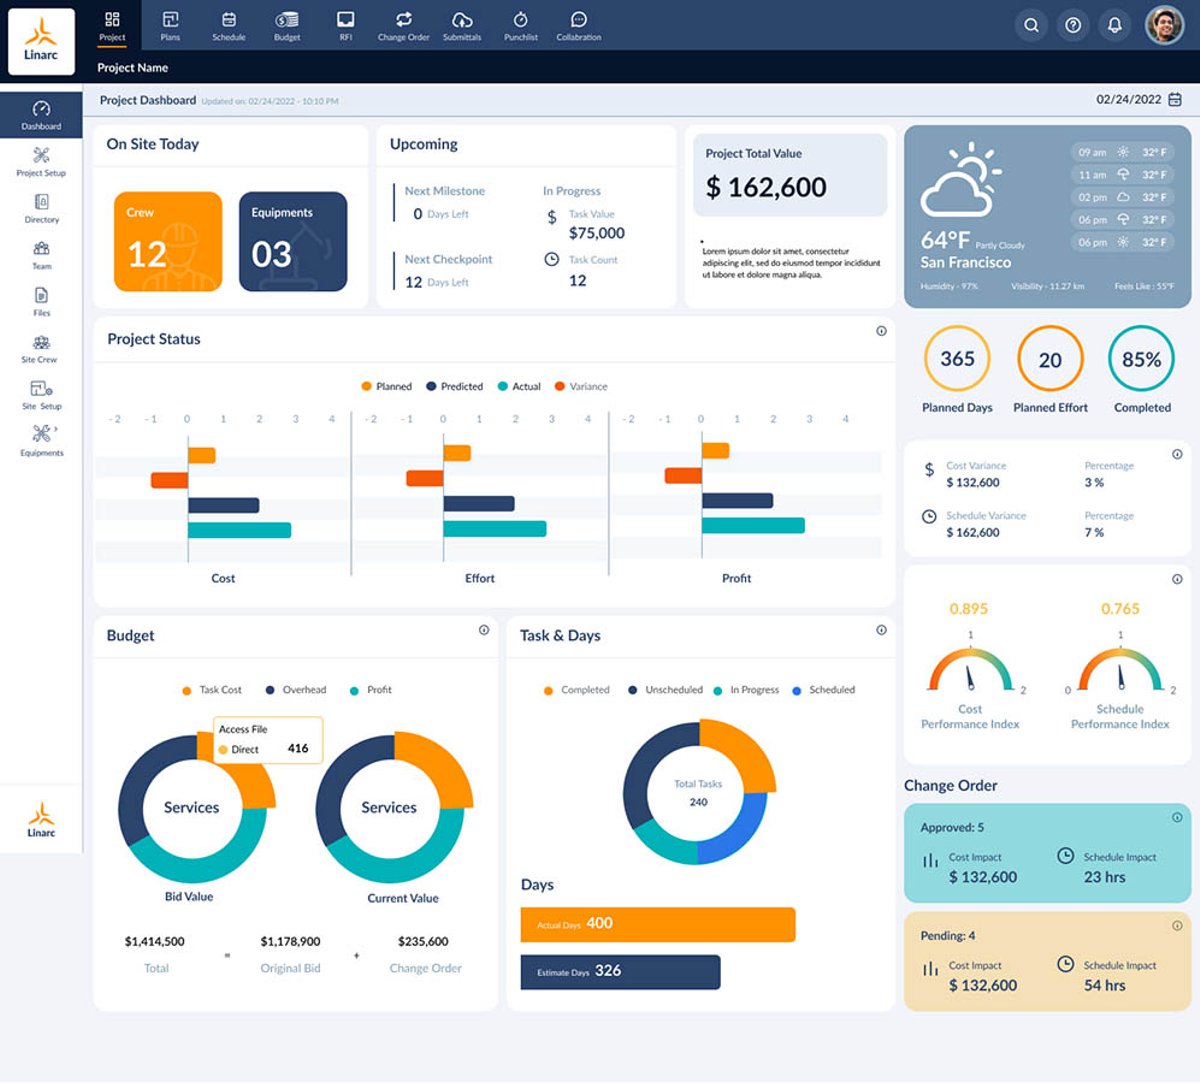 Linarc launches cloud-based Construction Project Management Software